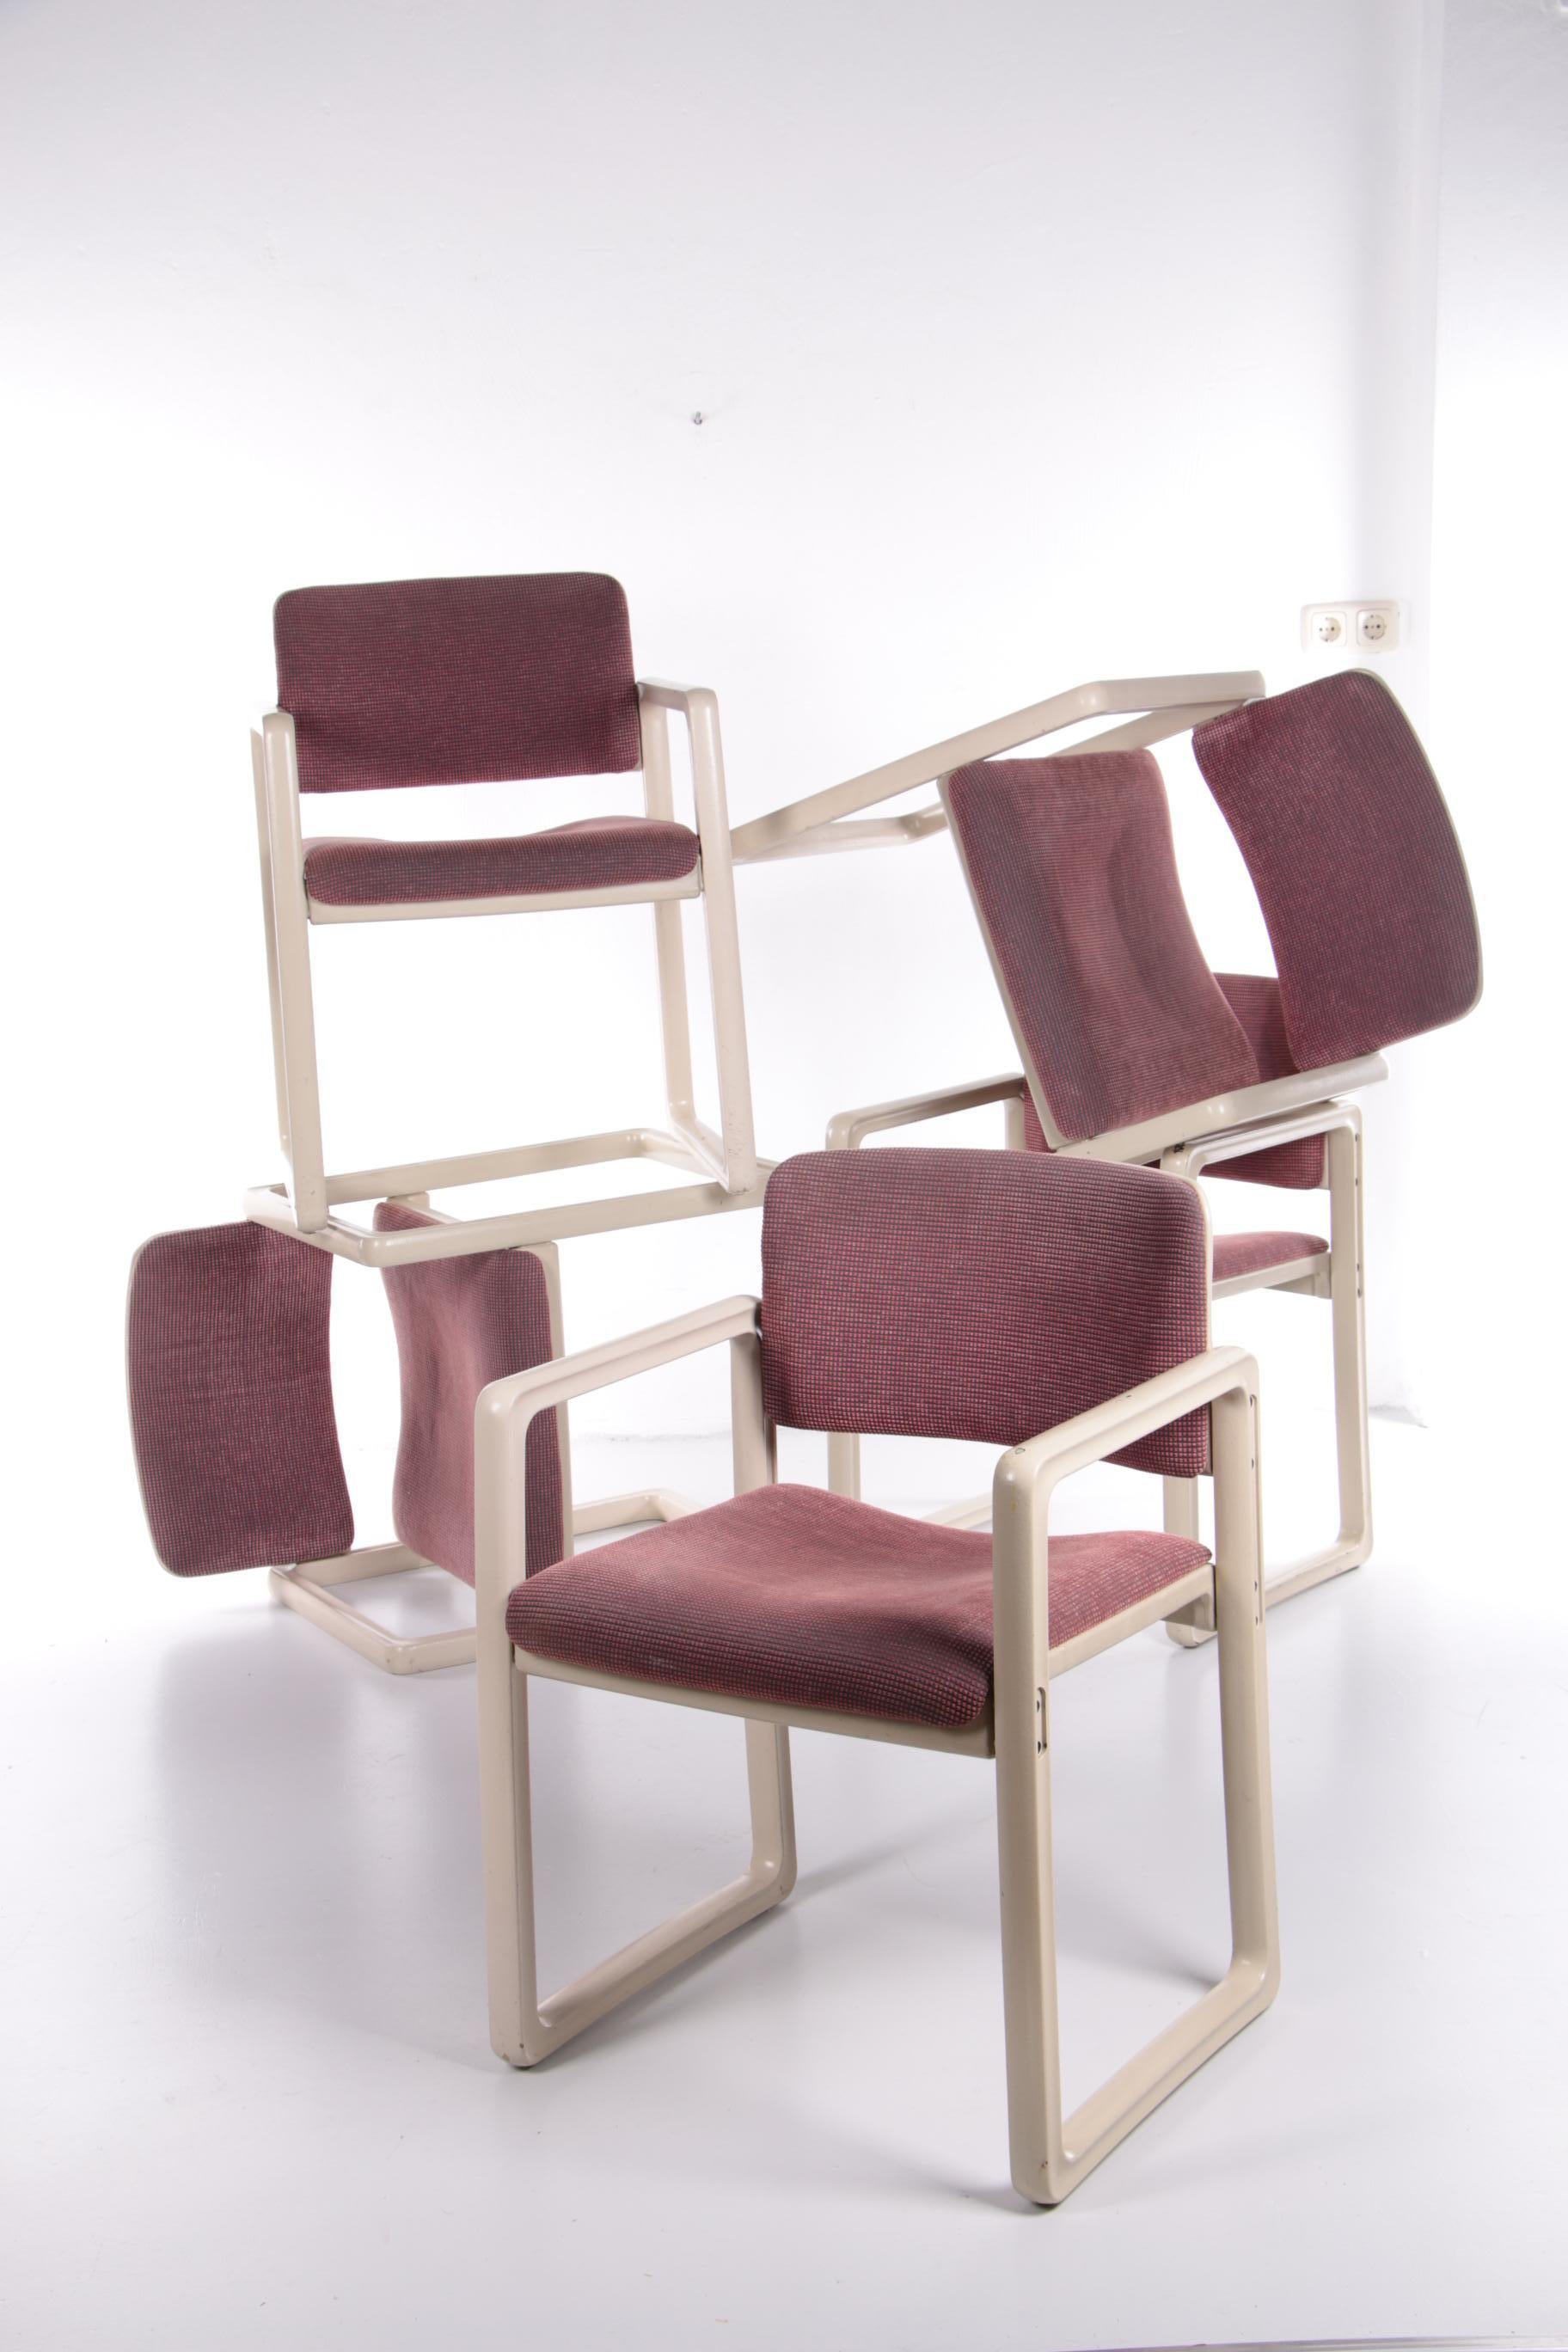 Beautiful vintage dining room chairs. The design is by B. Meijer and the chairs were produced by Kembo Holland, 1960s.

The chairs can be pushed together, which makes it easy to store the chairs.

The frame is made of sturdy plastic with upholstery